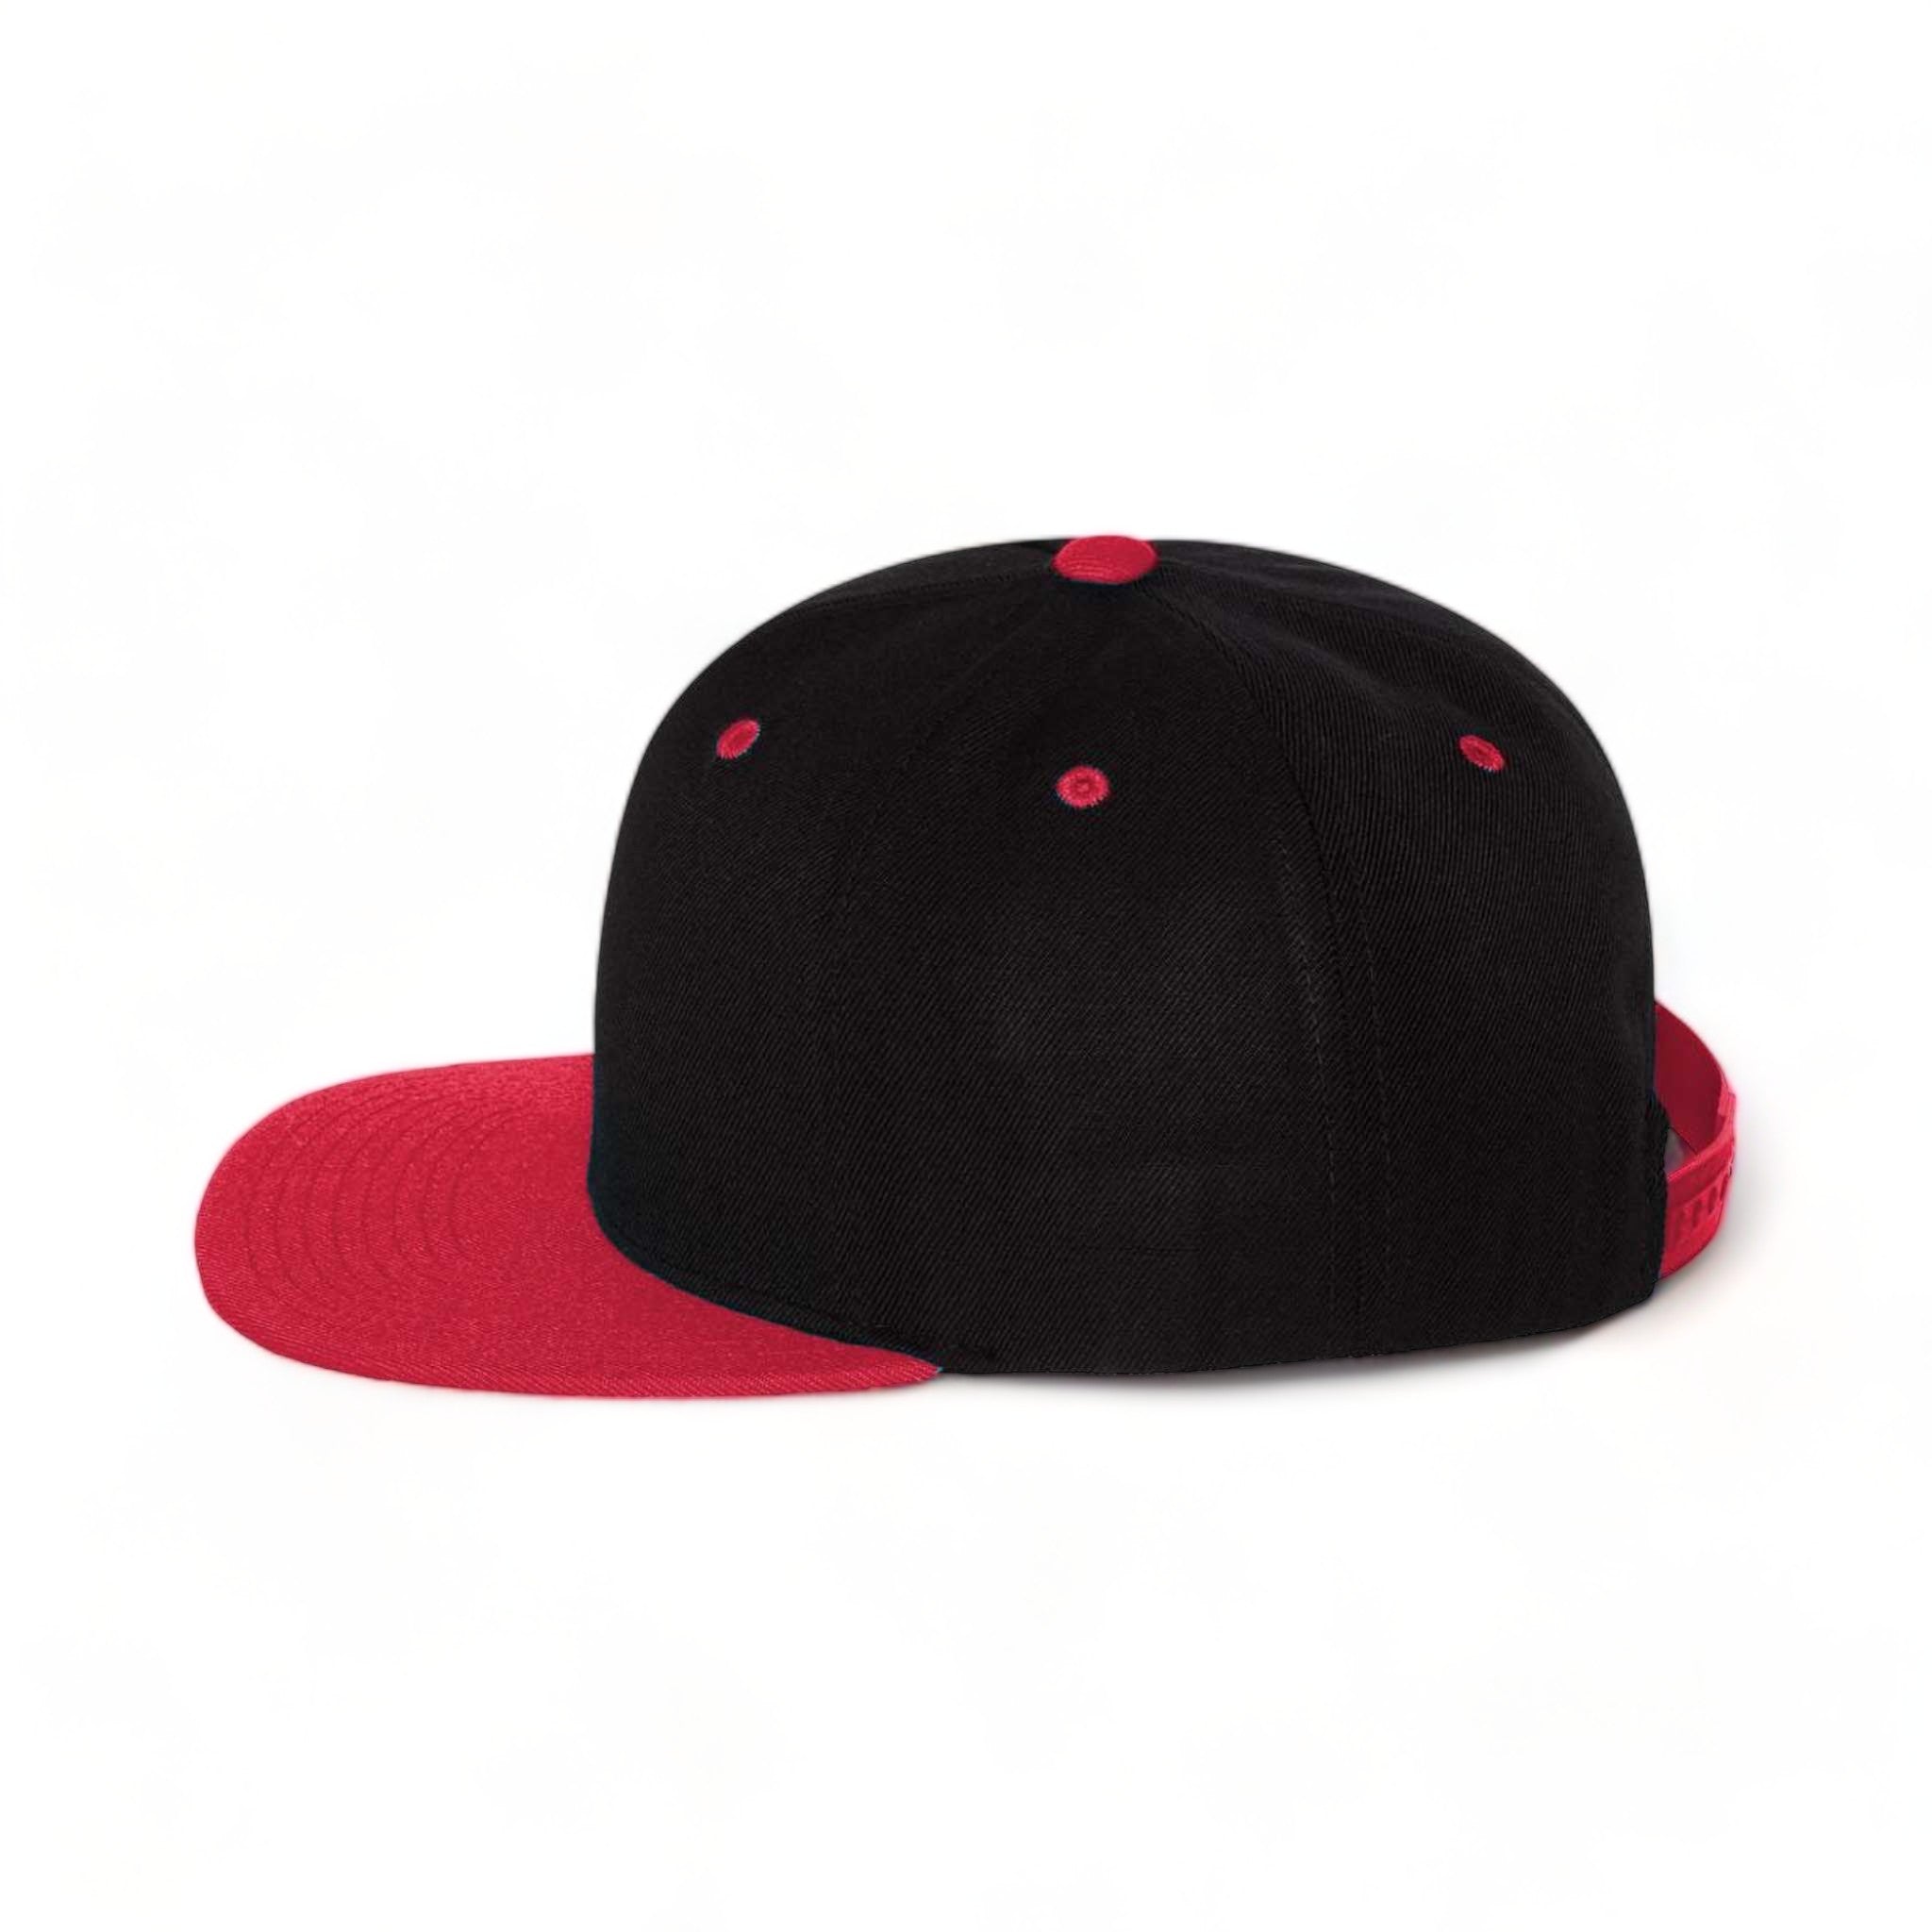 Side view of YP Classics 6089M custom hat in black and red